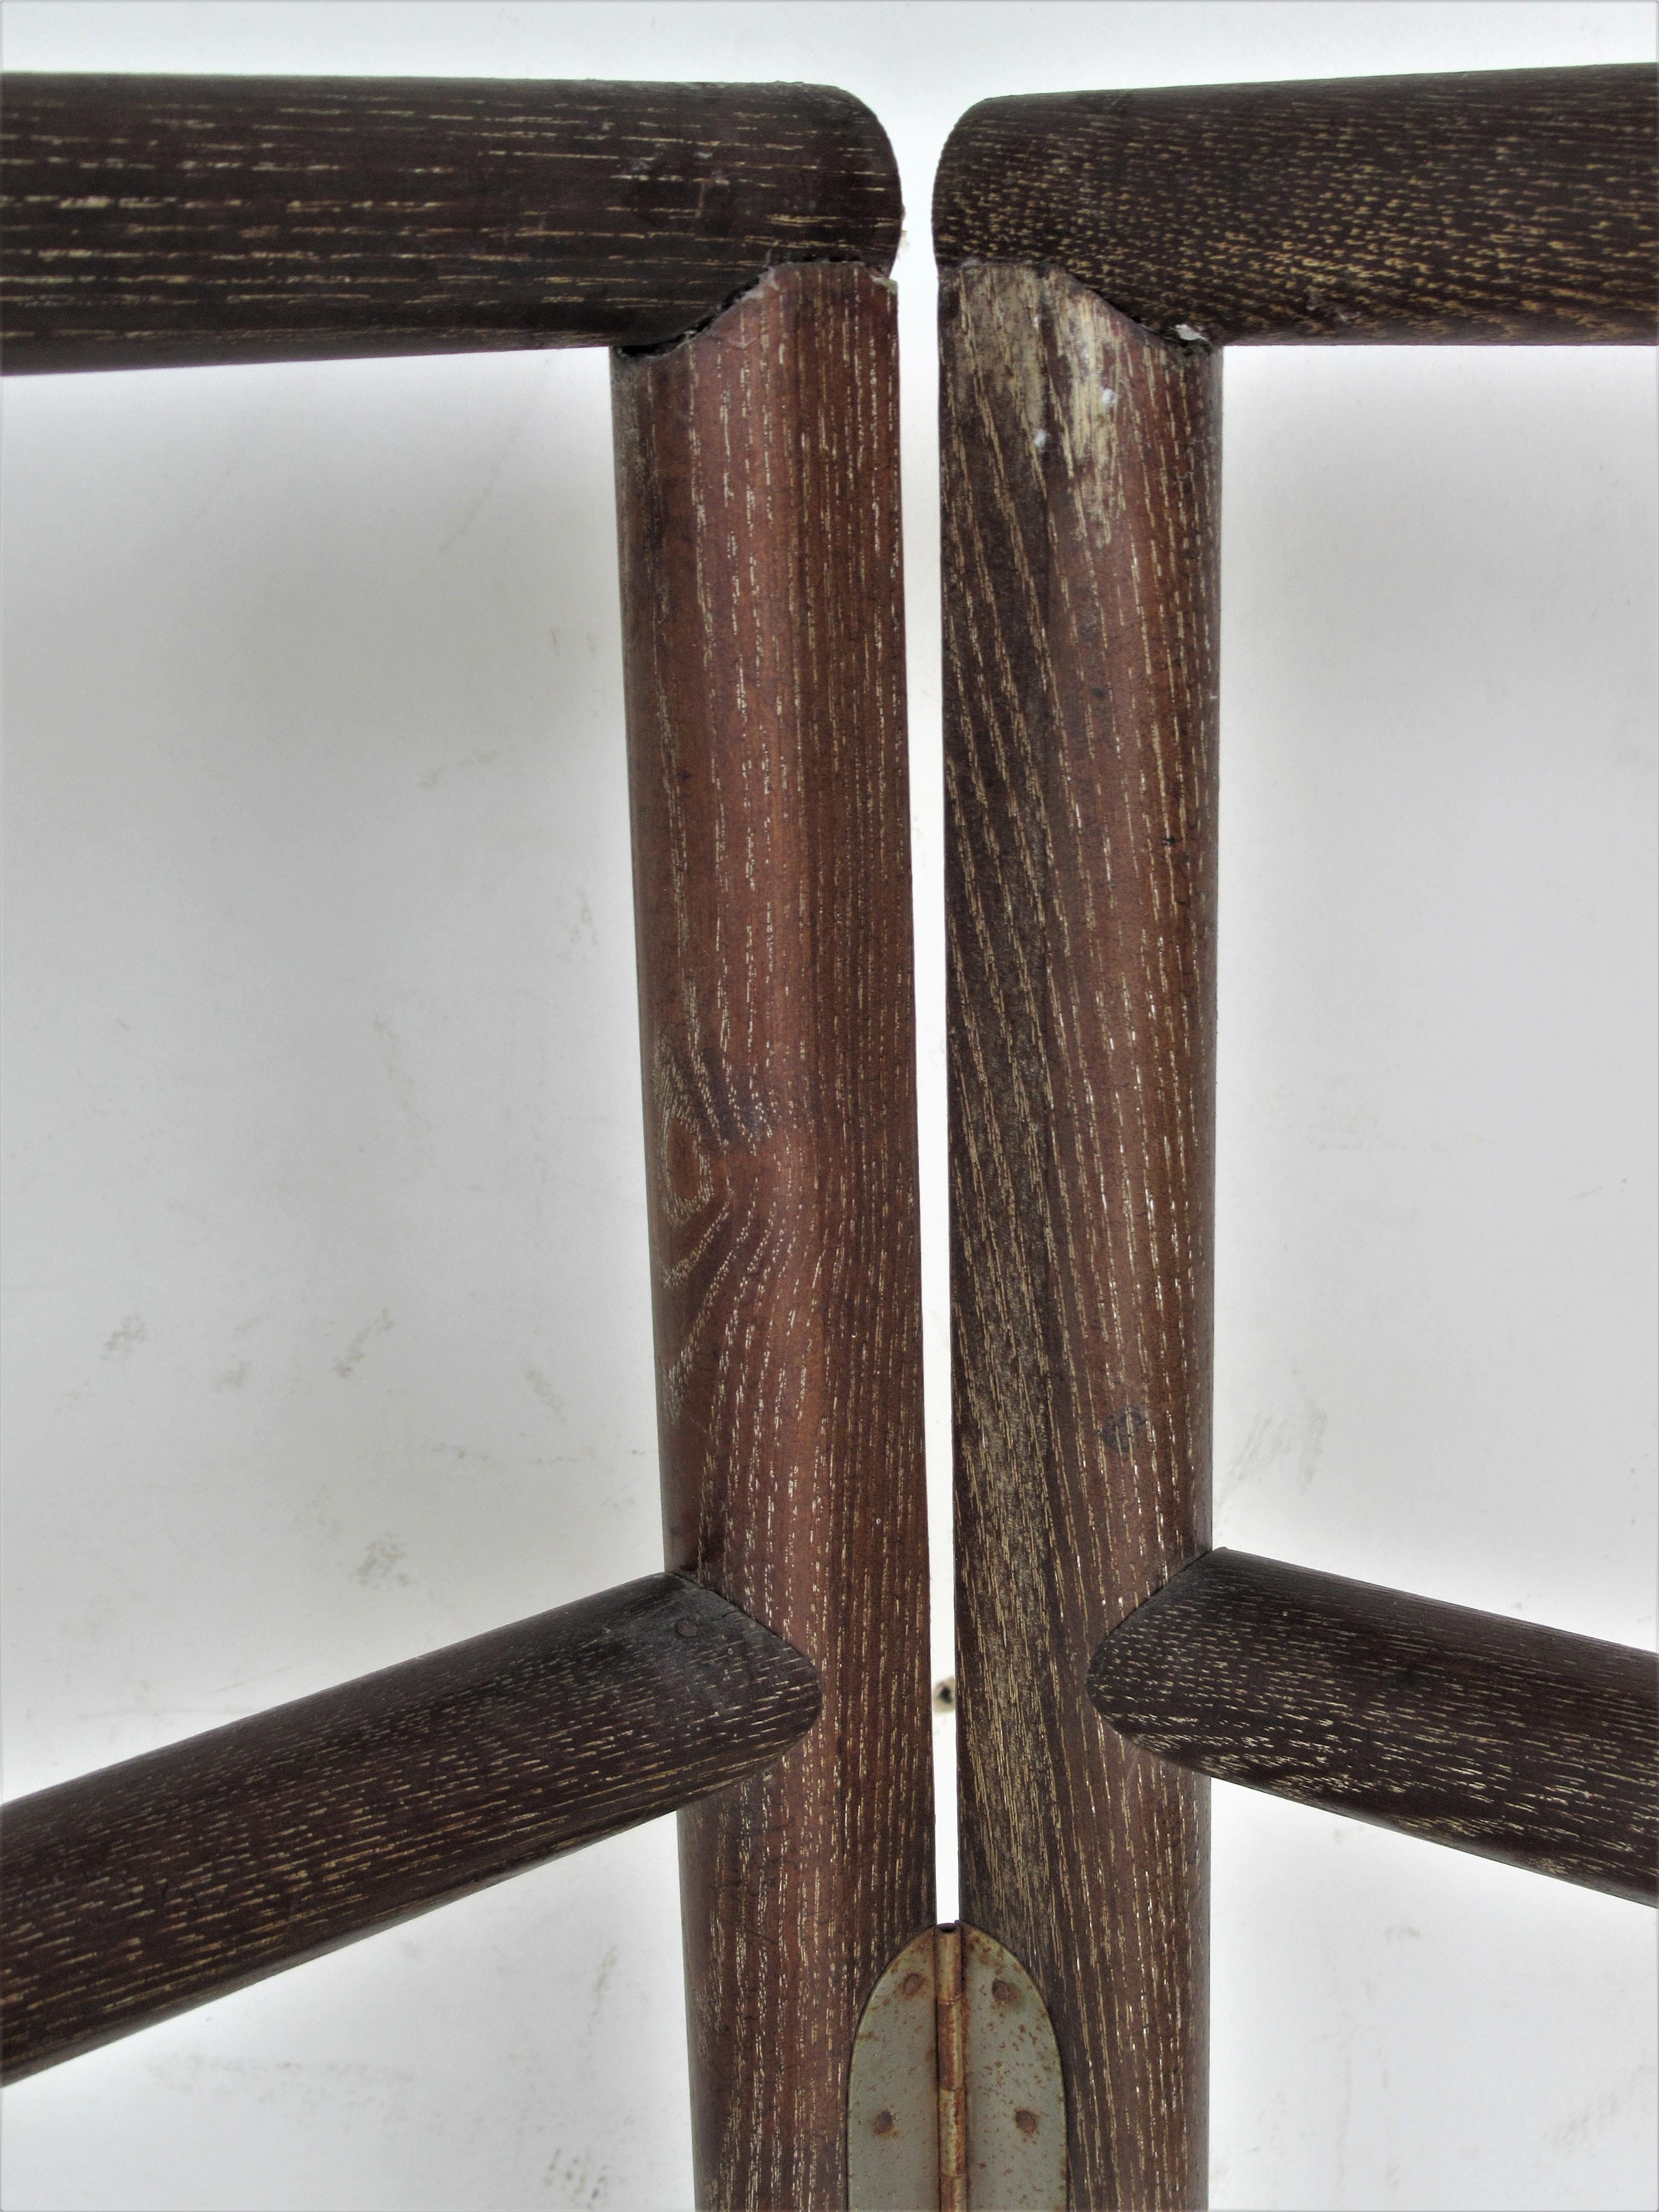 Vintage Japanese bi-fold kimono rack stand with Classic traditional form in all-over beautifully aged original stained and cerused finish to richly grained wood. Free standing most extended measurements are 58 inches wide x 60 inches high x 1 1/4